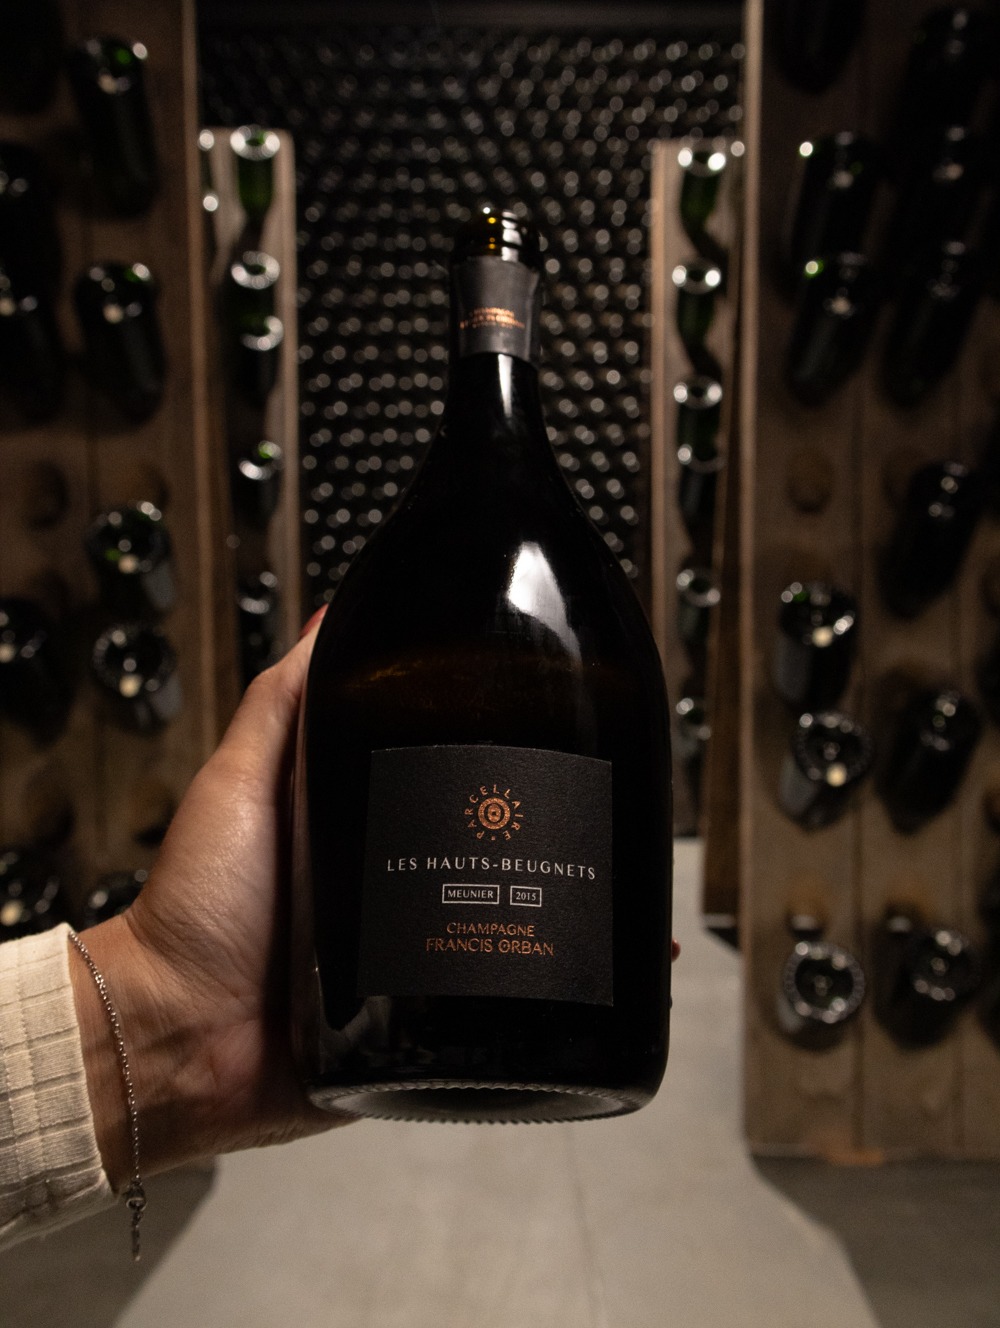 Champagne Francis Orban Cuvée Parcellaire Les Hauts Beugnets Brut 2015																	This checks all the boxes – single vineyard, Grower Champagne, old vines, extra time on the lees, low-dosage… and Last Bubble’s epic price on a wine you won’t find anywhere else!